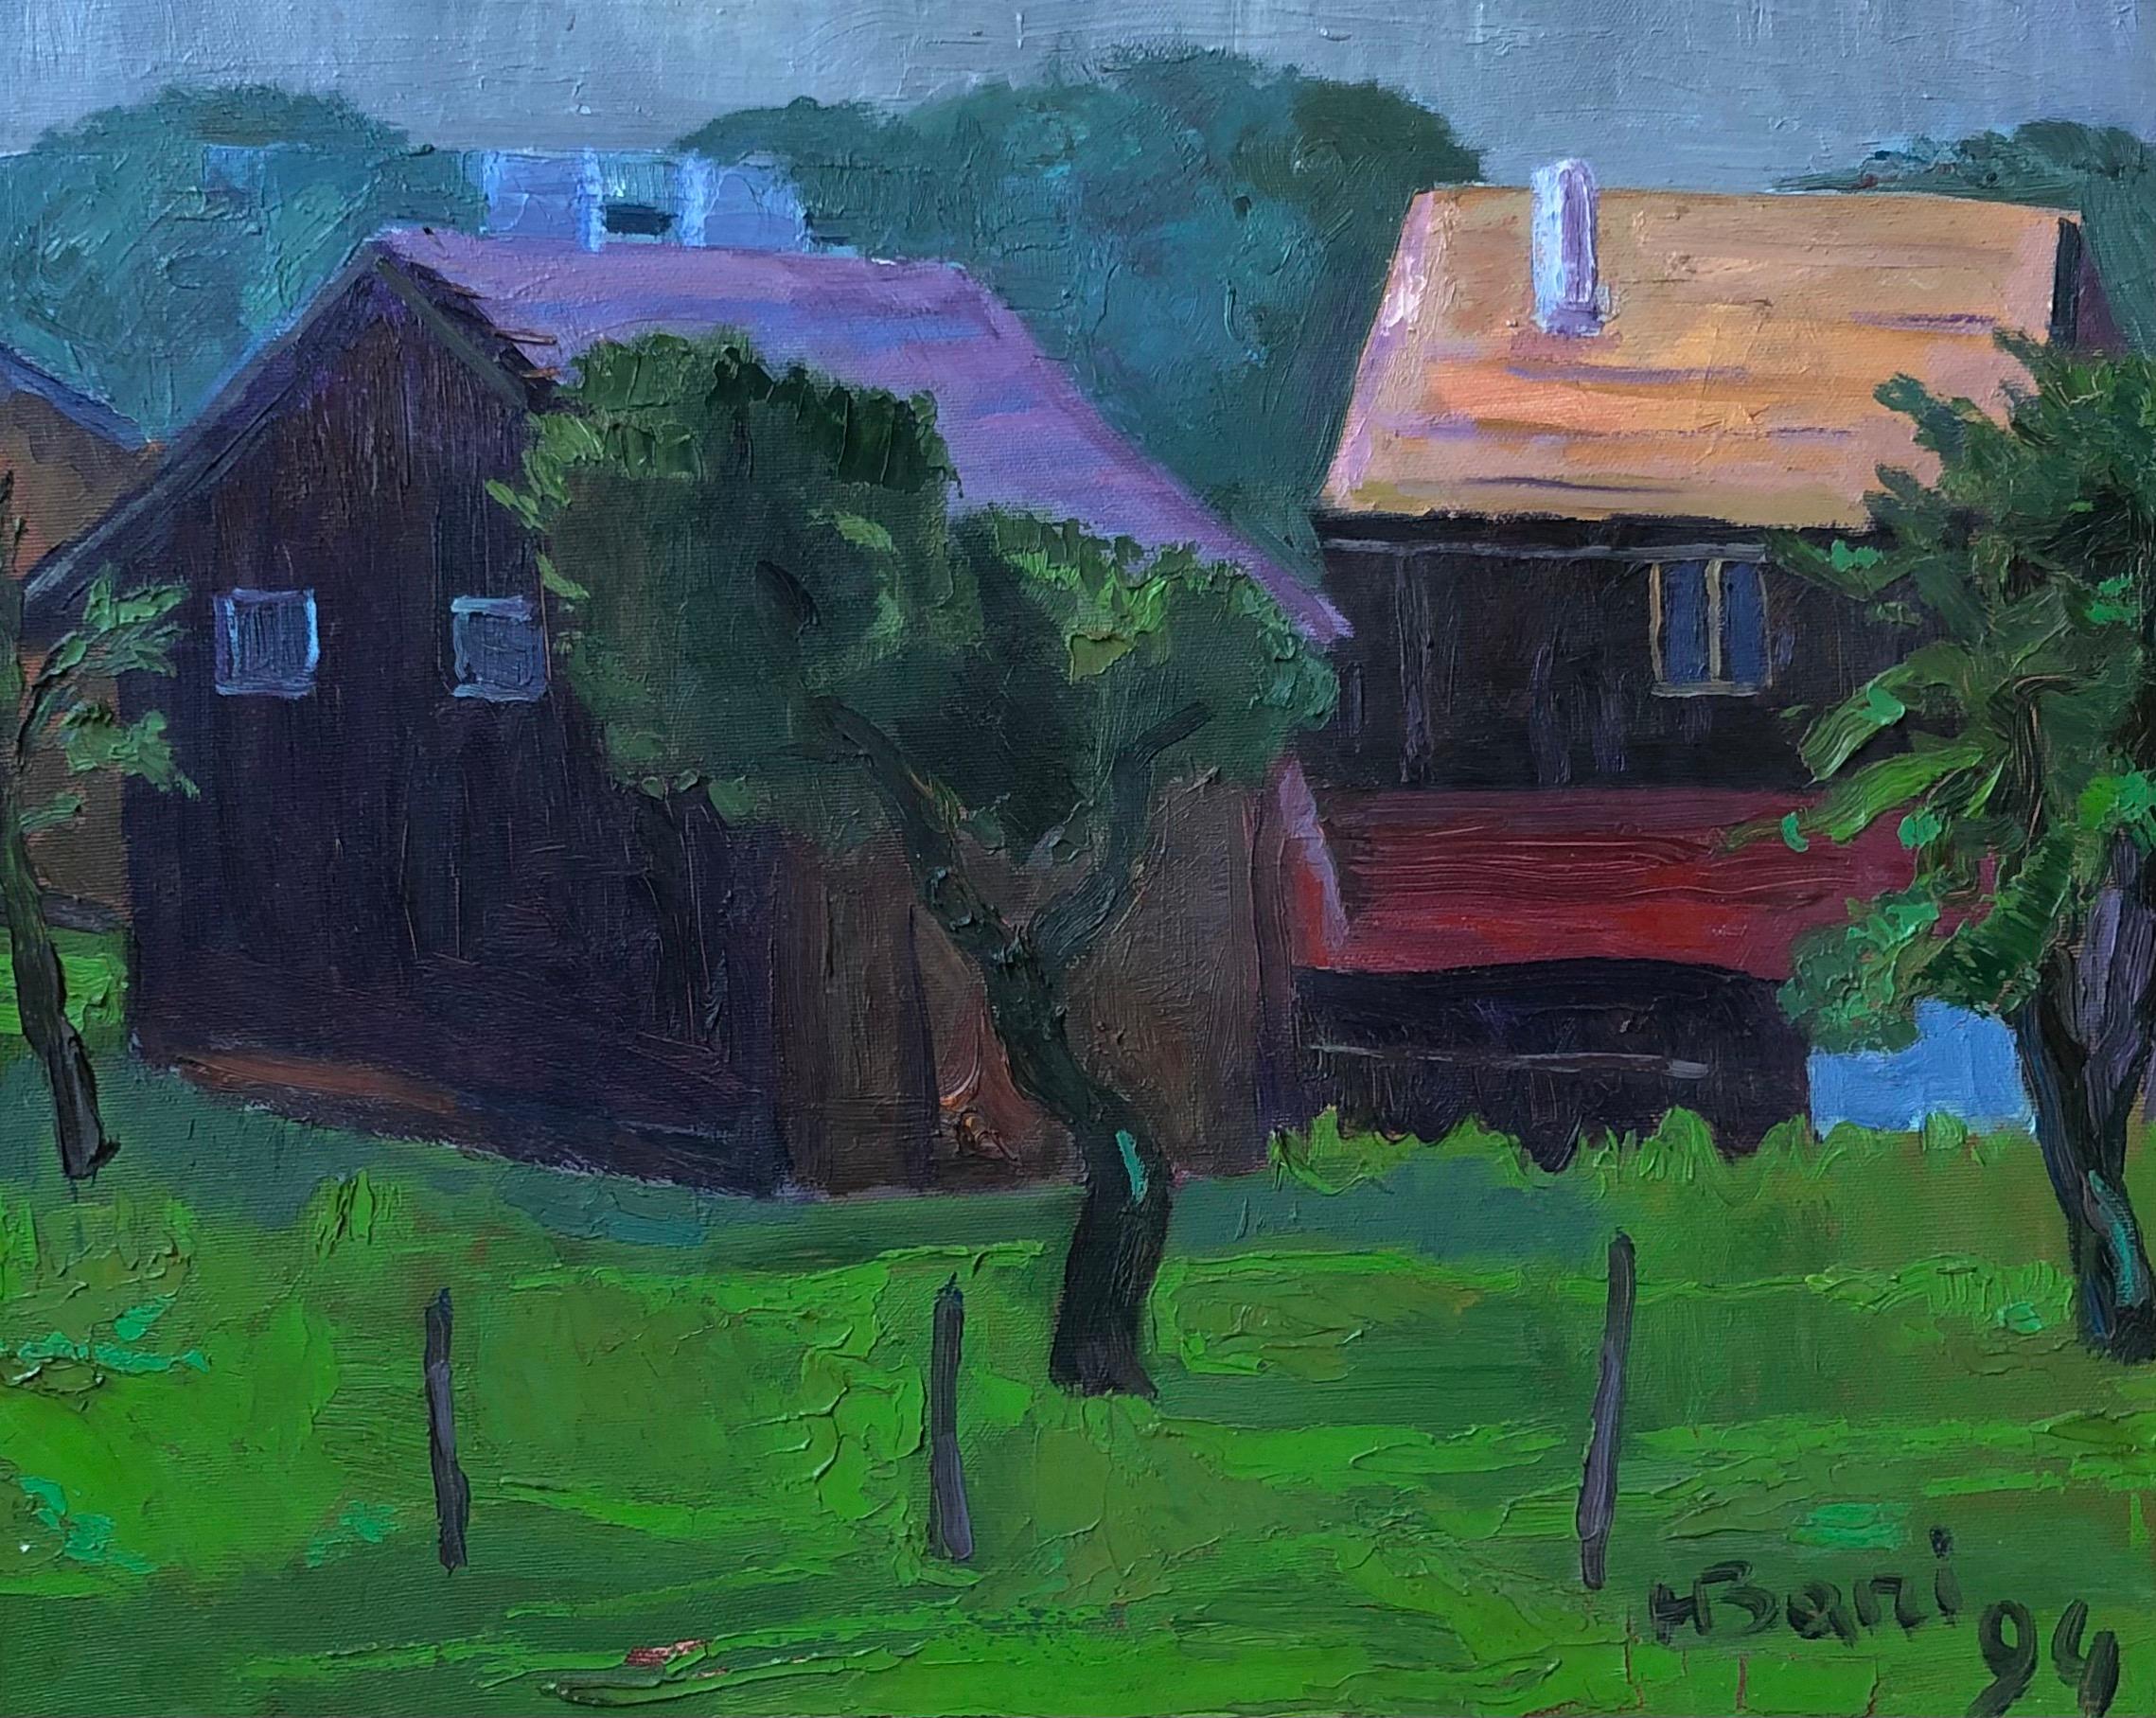 H. Bani Landscape Painting - The cottage with the purple roof